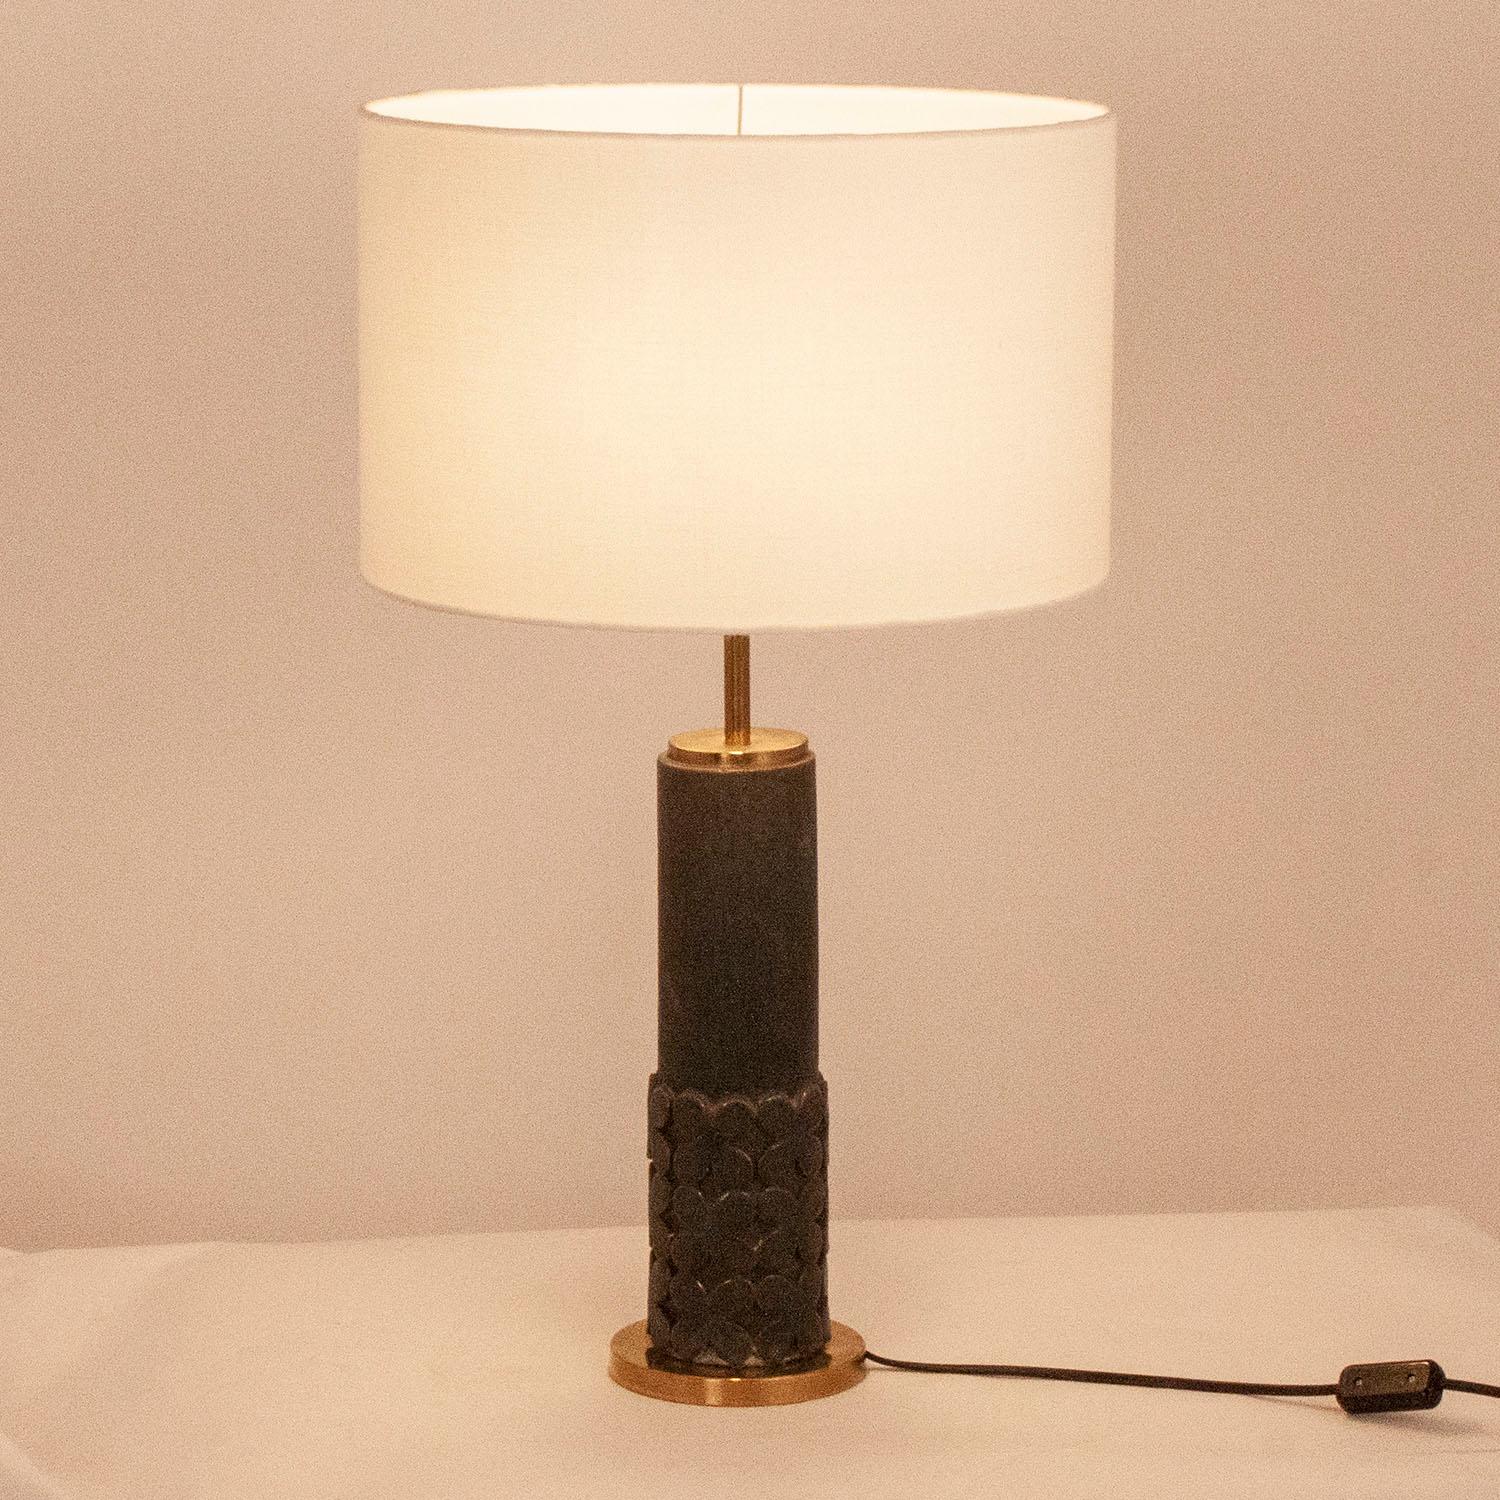 Table lamp designed by Jordi Vilanova.
Brass and ceramics, made by Jordi Aguadé. (Great Catalan potter).
New fabric screen, made of linen fabric
Spain, 1970s.